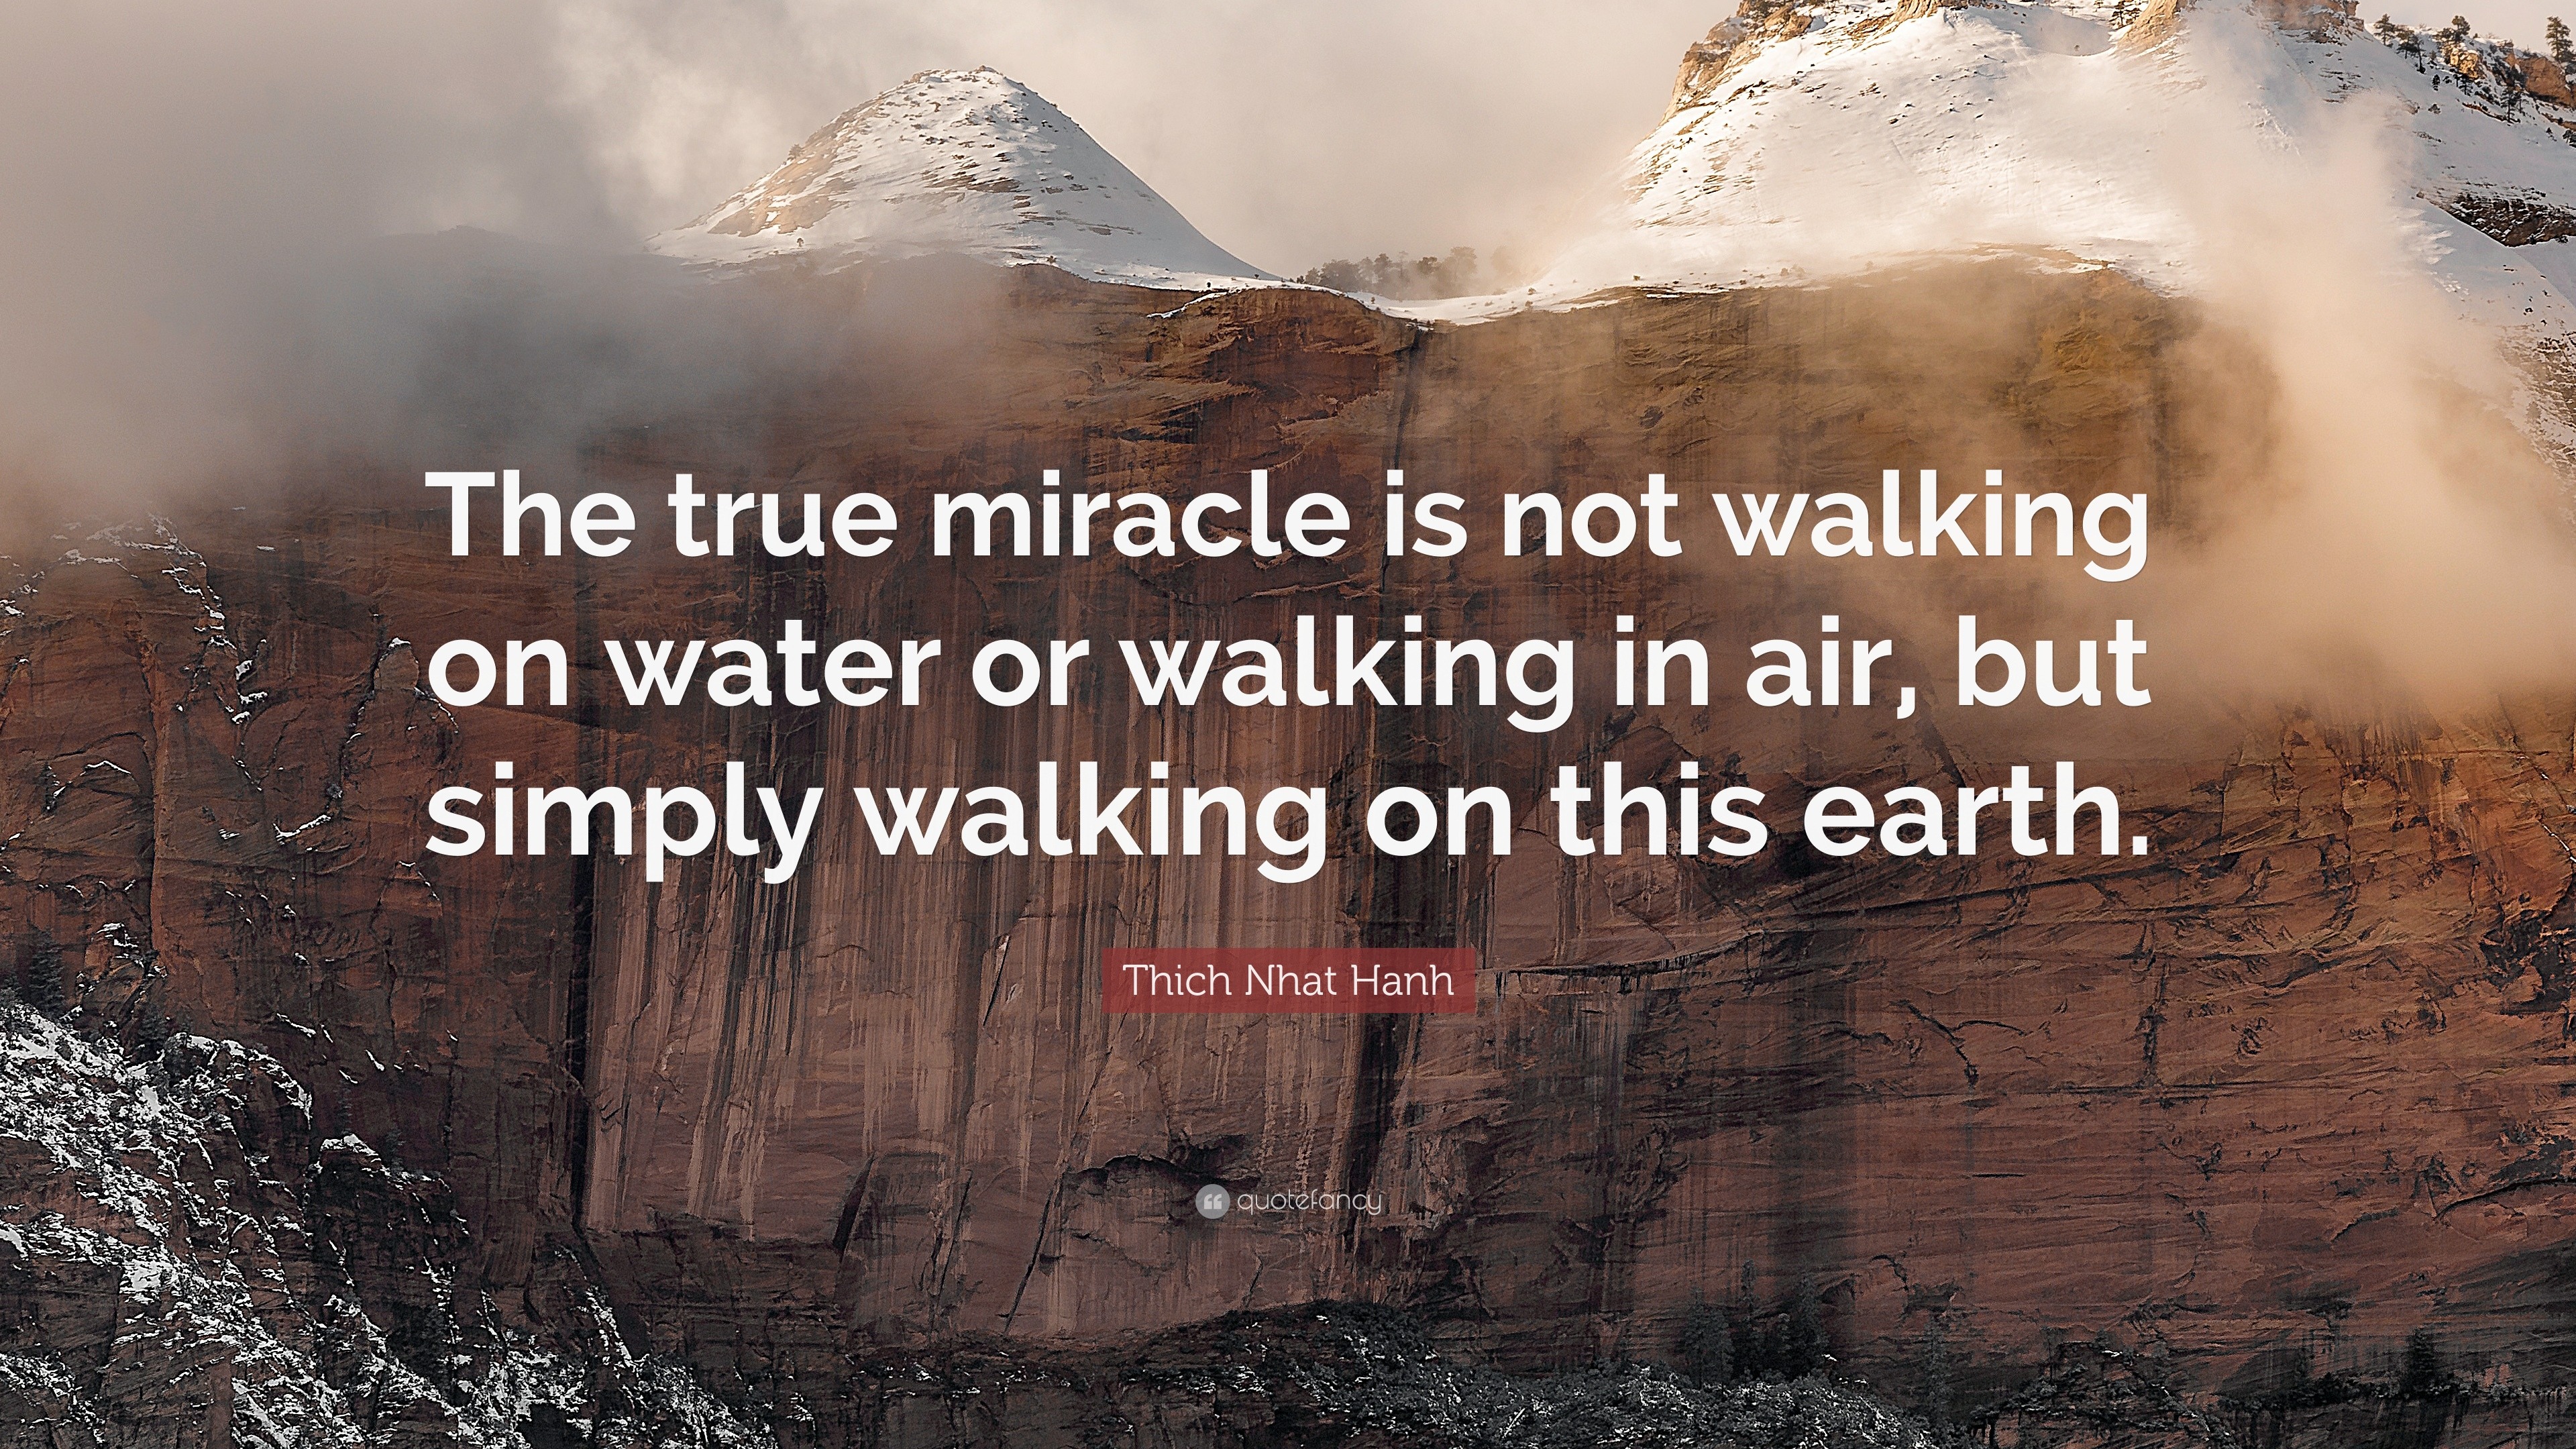 Thich Nhat Hanh Quote “The true miracle is not walking on water or walking